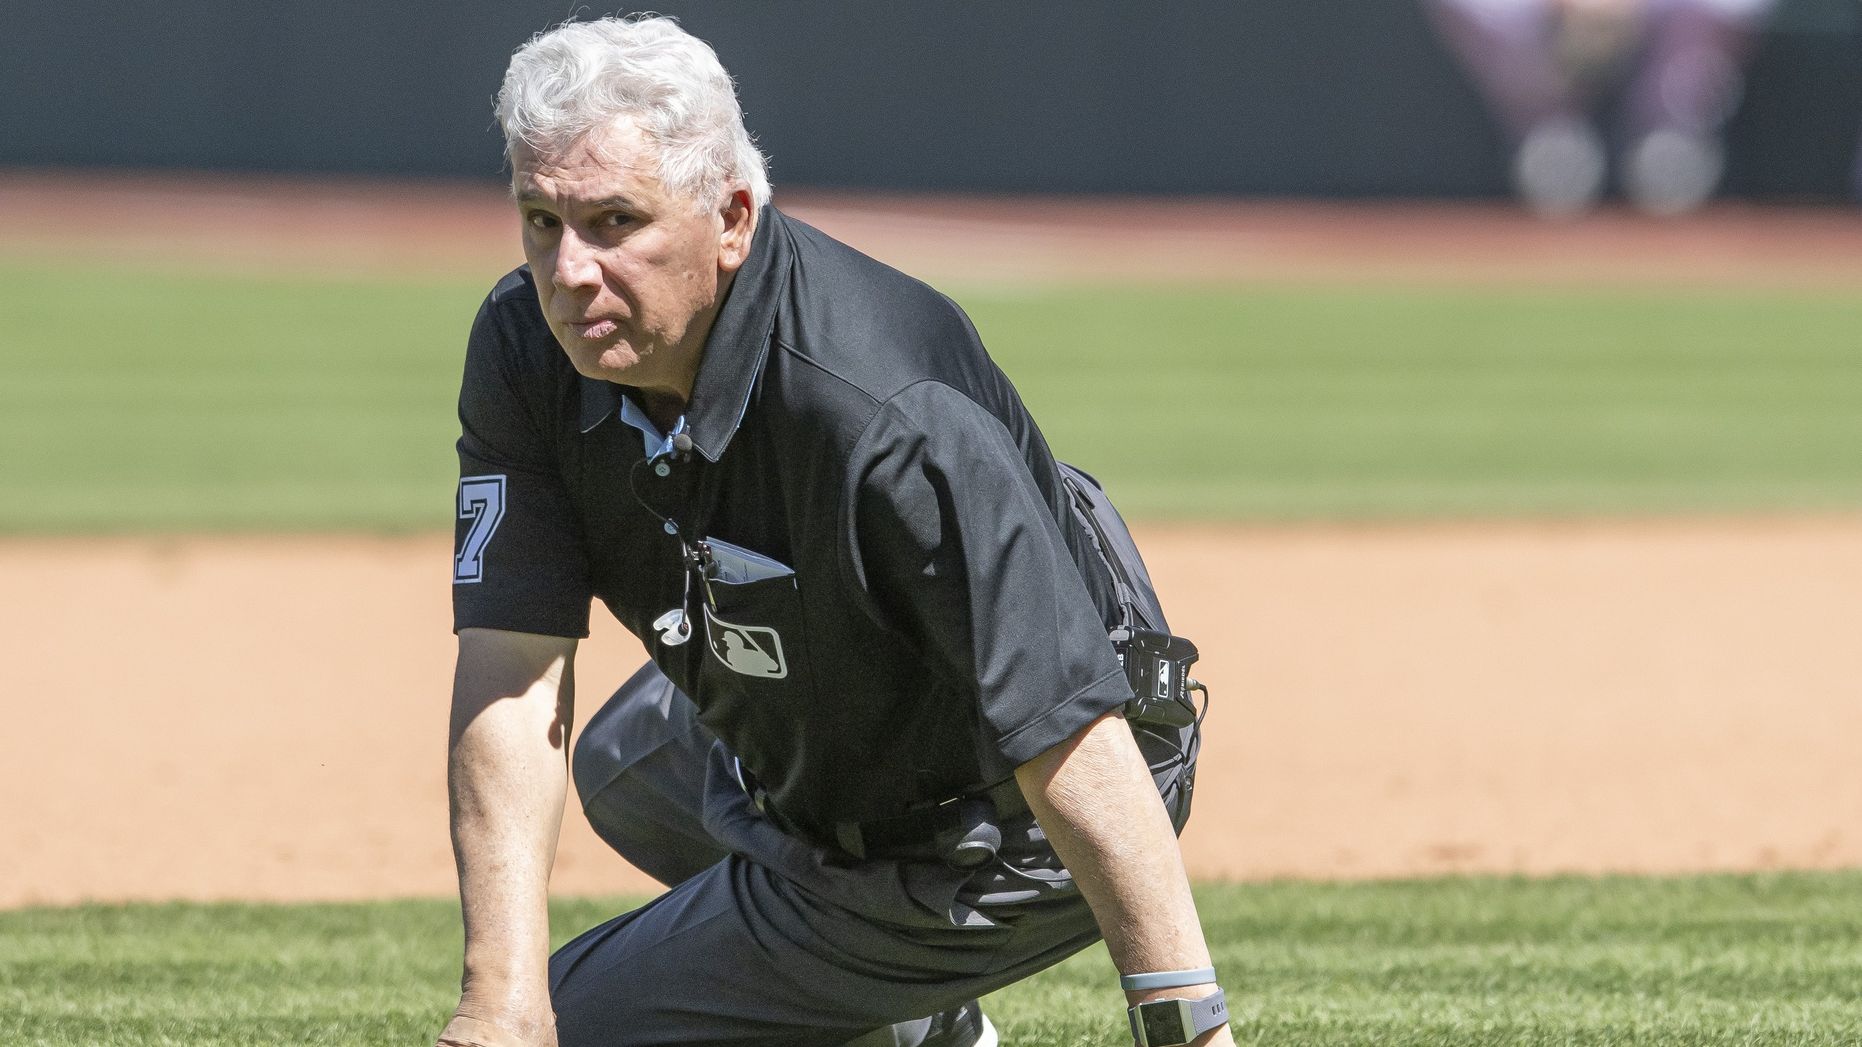 MLB Umpire Hospitalized After Throw in Yankees-Guardians Hits Him